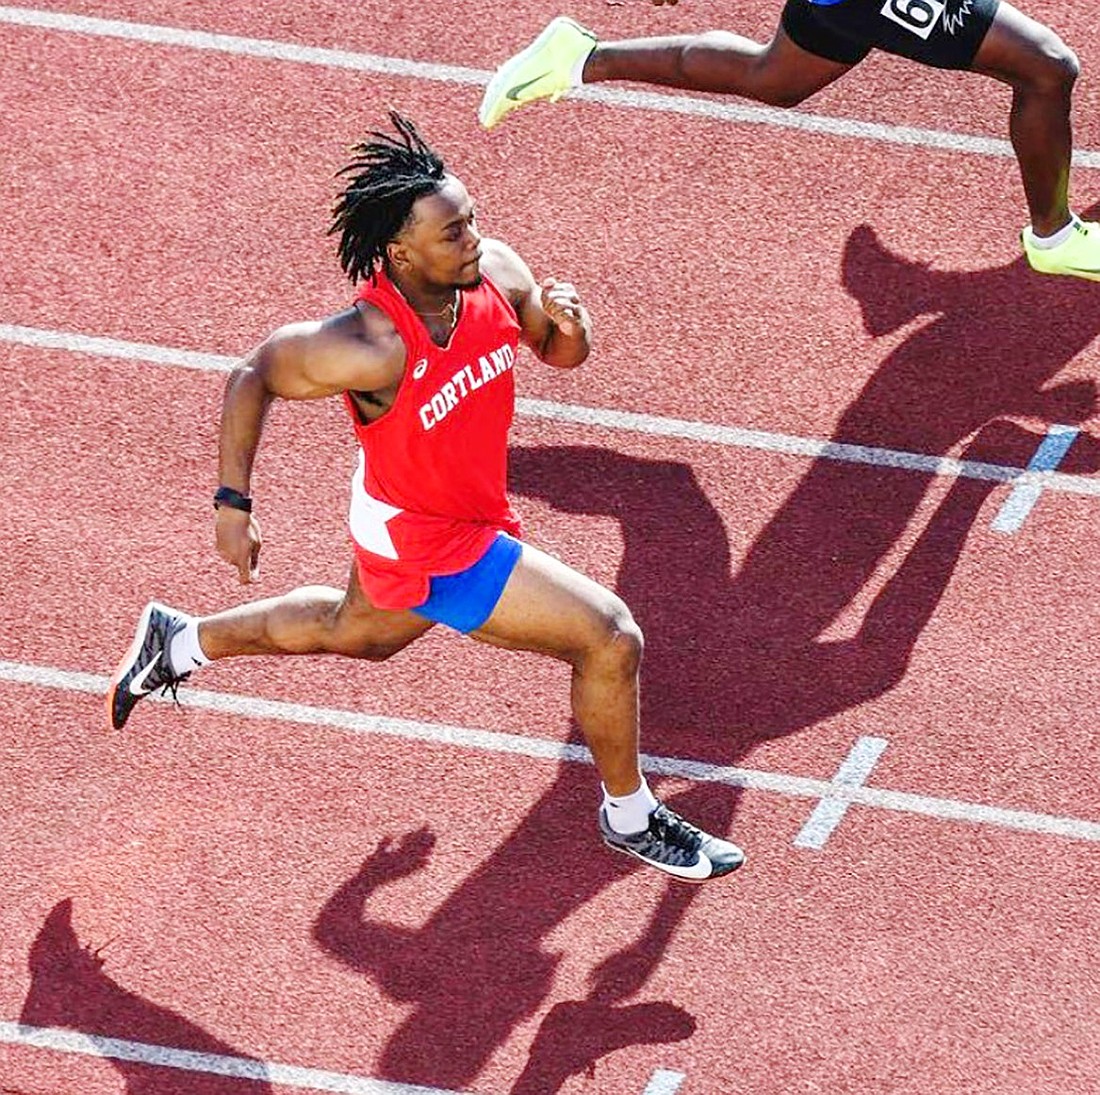 Jordan Lewis competes in the Cortland Classic track meet at SUNY Cortland in April 2023.